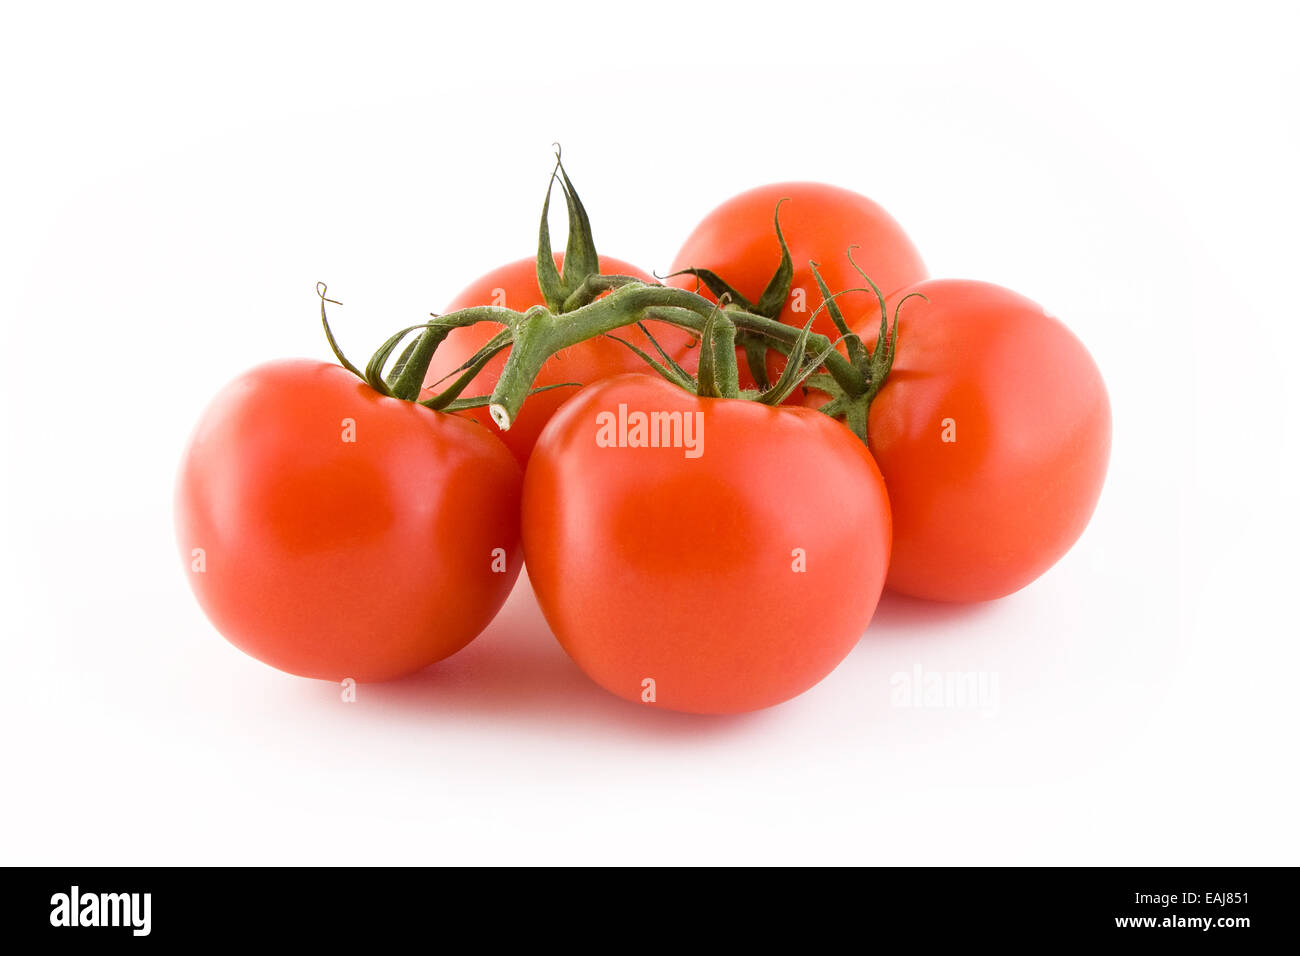 Bunch of fresh tomatoes isolated on white background, vegetables Stock Photo